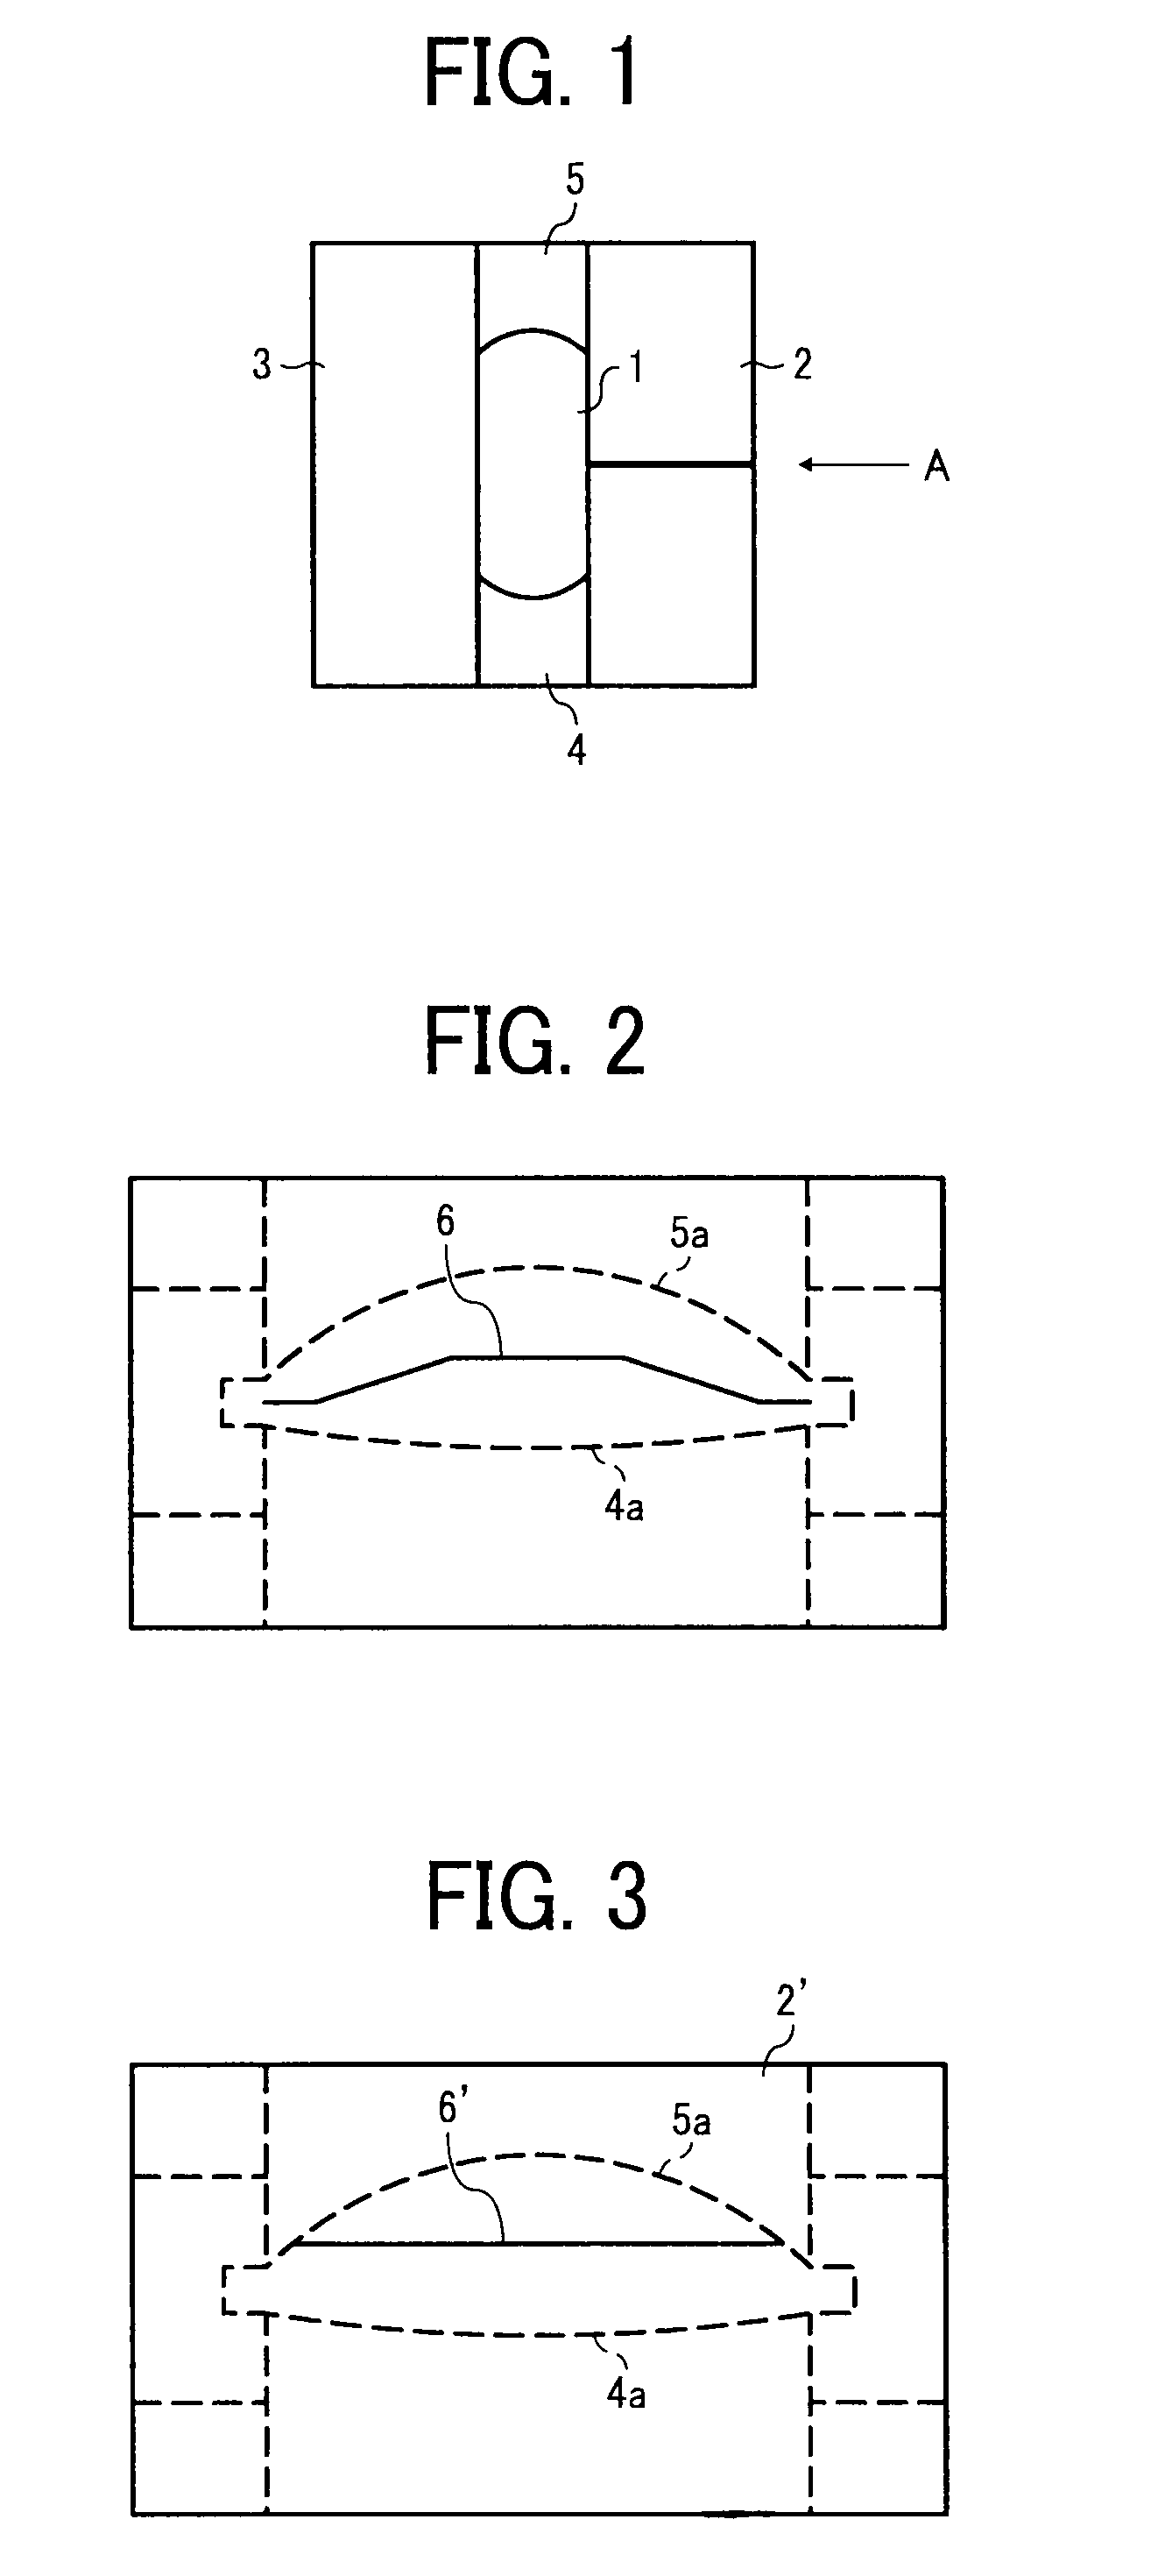 Image forming apparatus, optical scanning device, and plastic lens